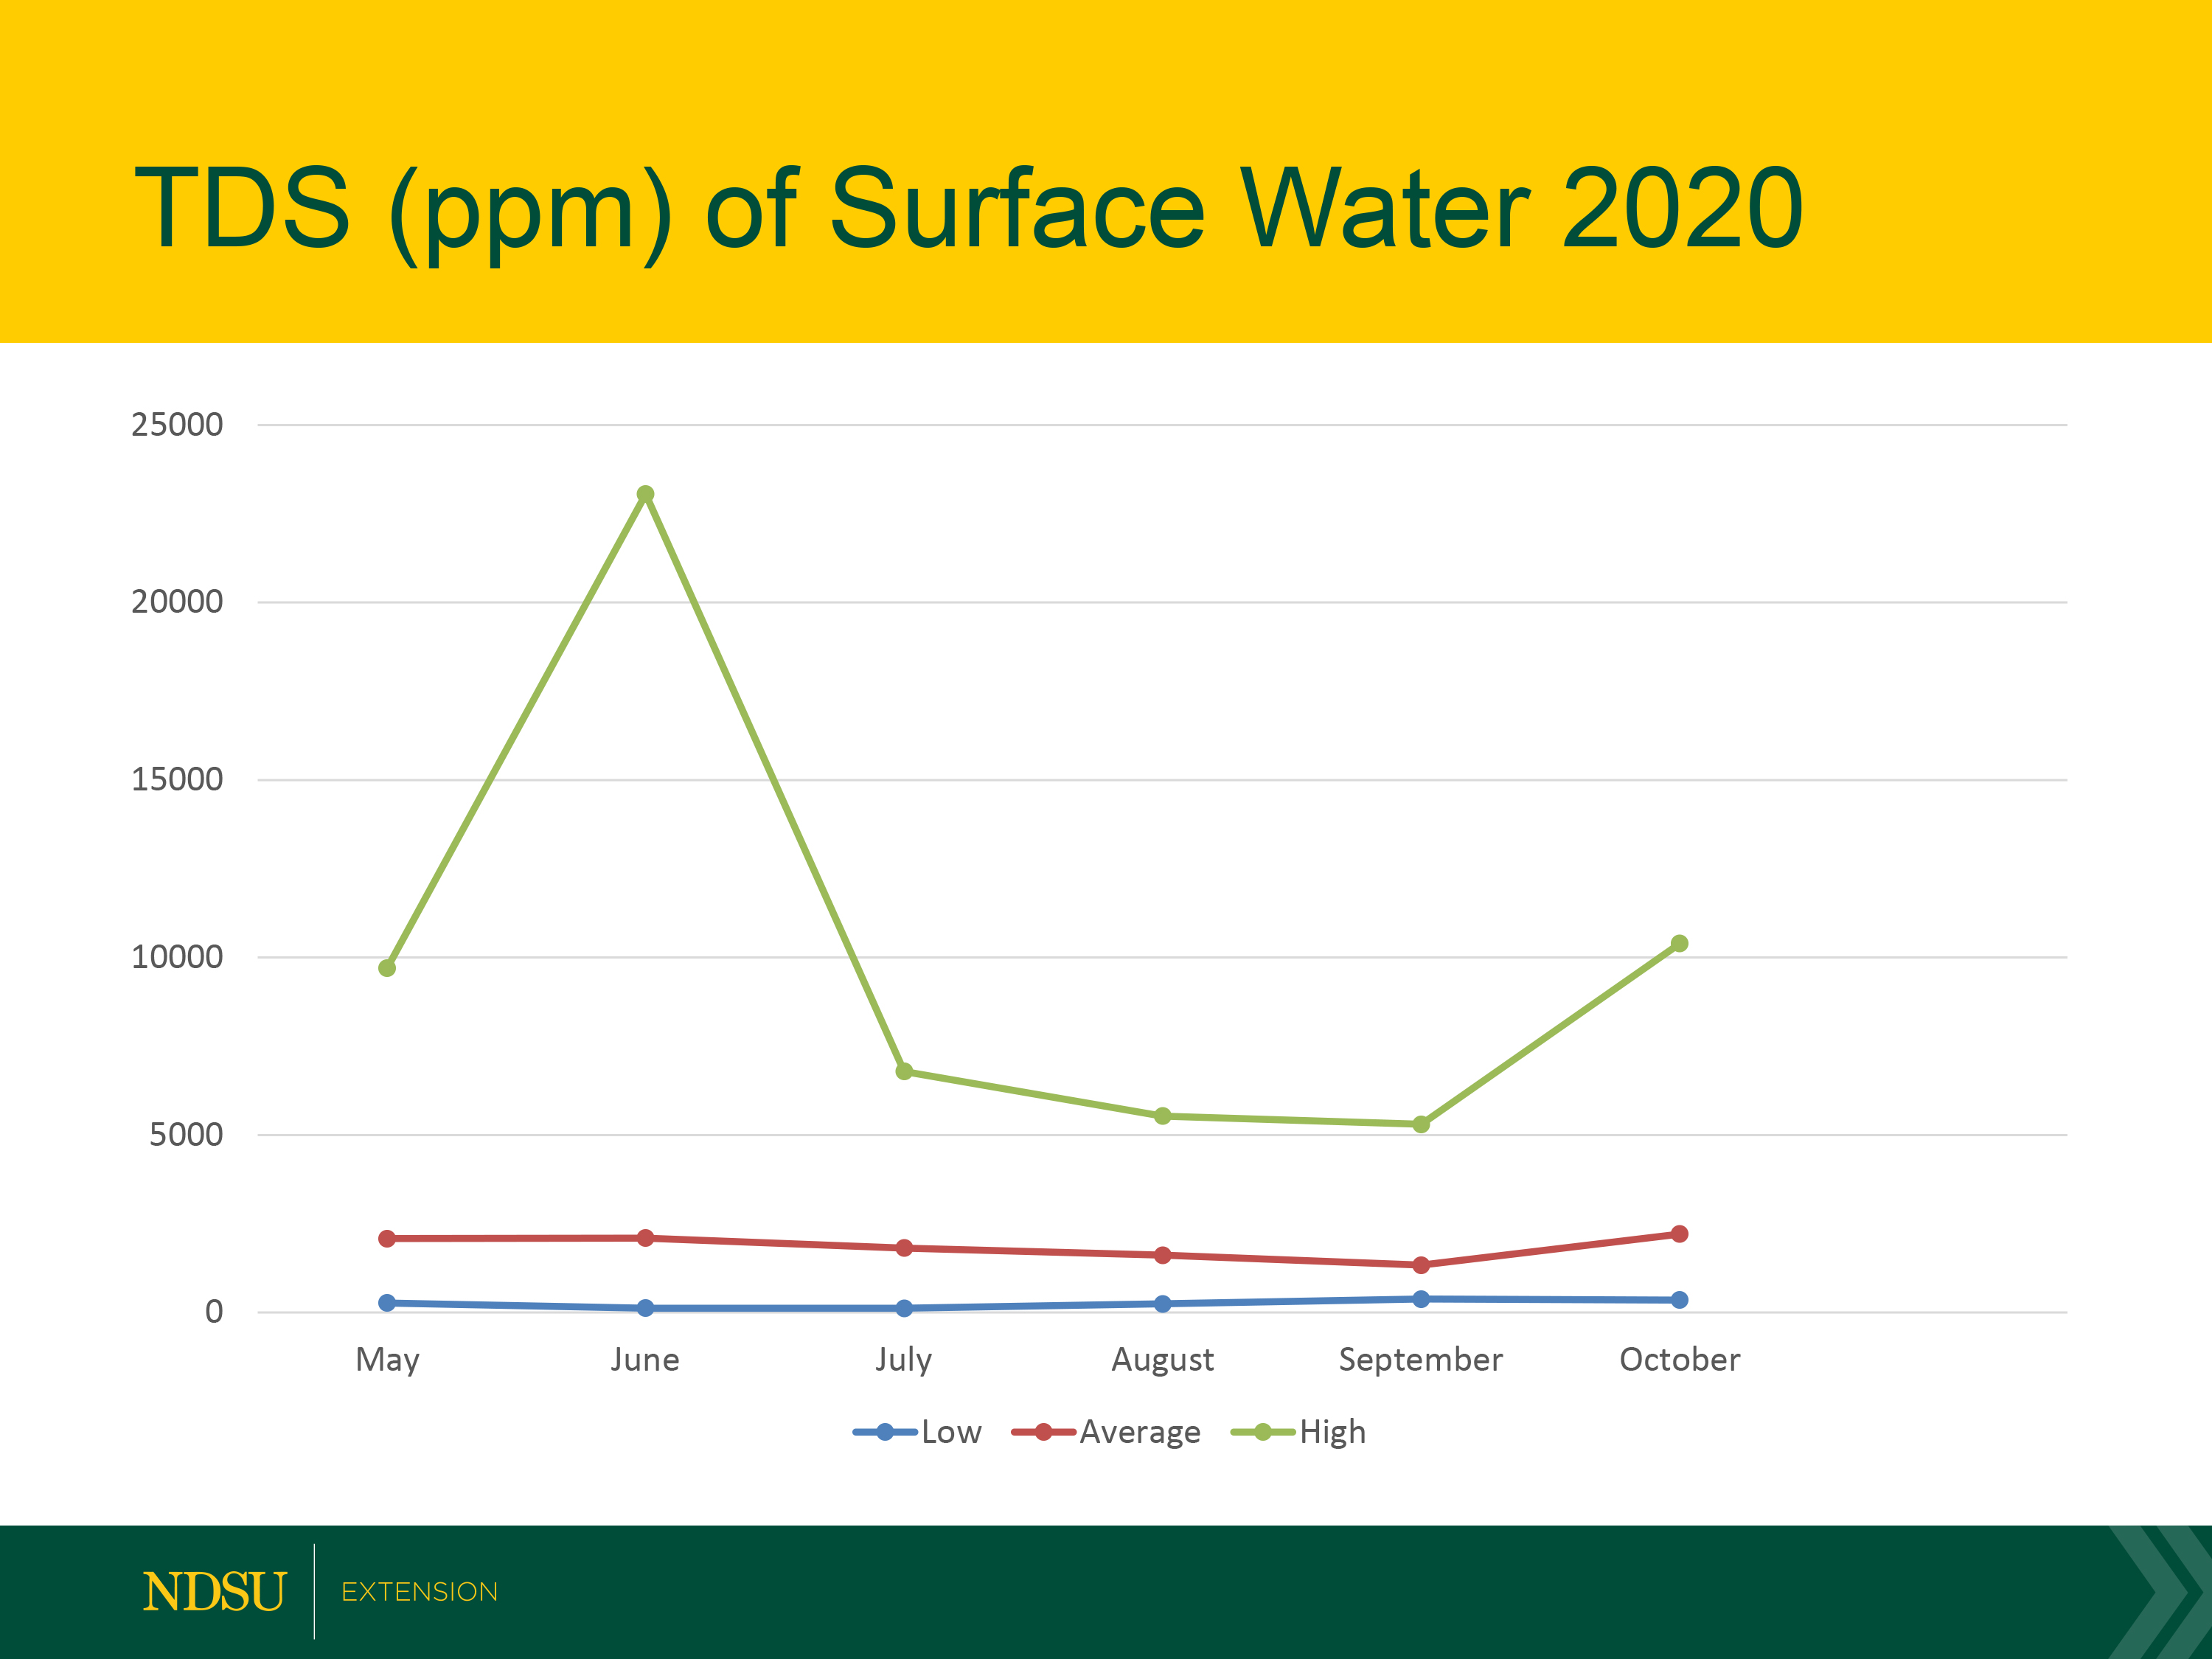 This shows the total dissolved solids of surface water. (NDSU graphic)